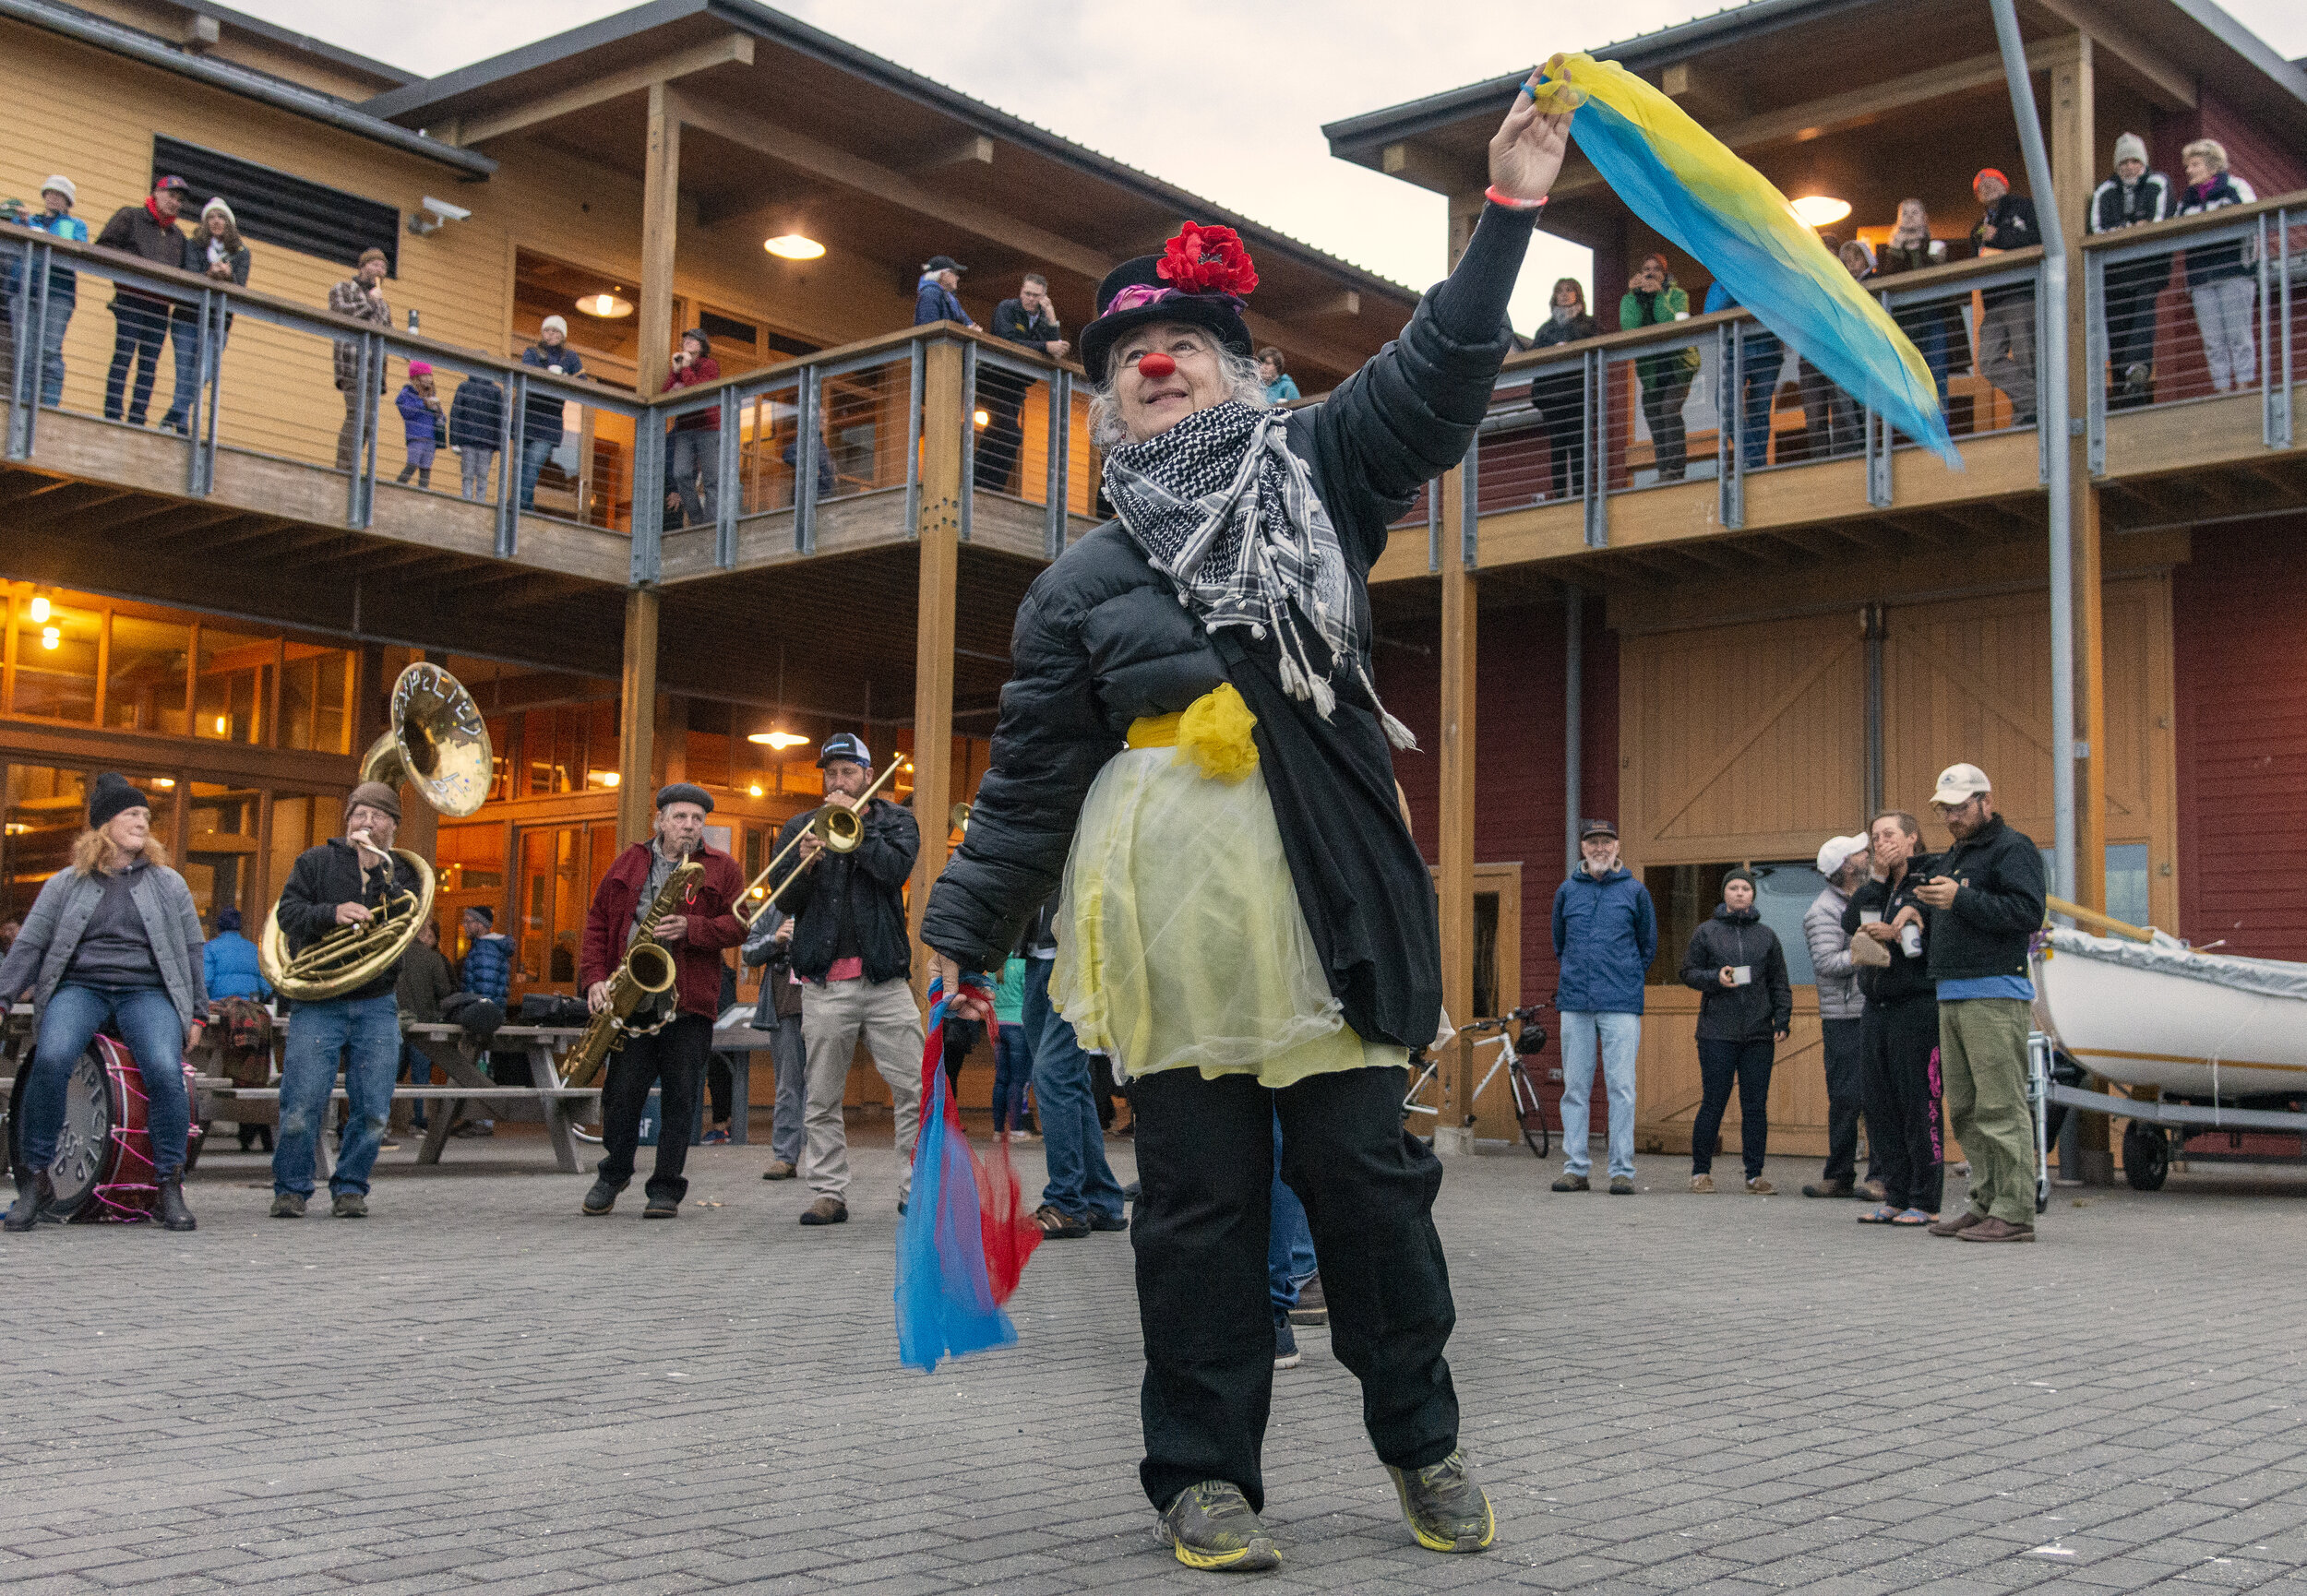  Kristin Crowley dances in front of The Unexpected Brass Band on Monday, June 3, 2019, during the start of the Race to Alaska in Port Townsend, WA. 